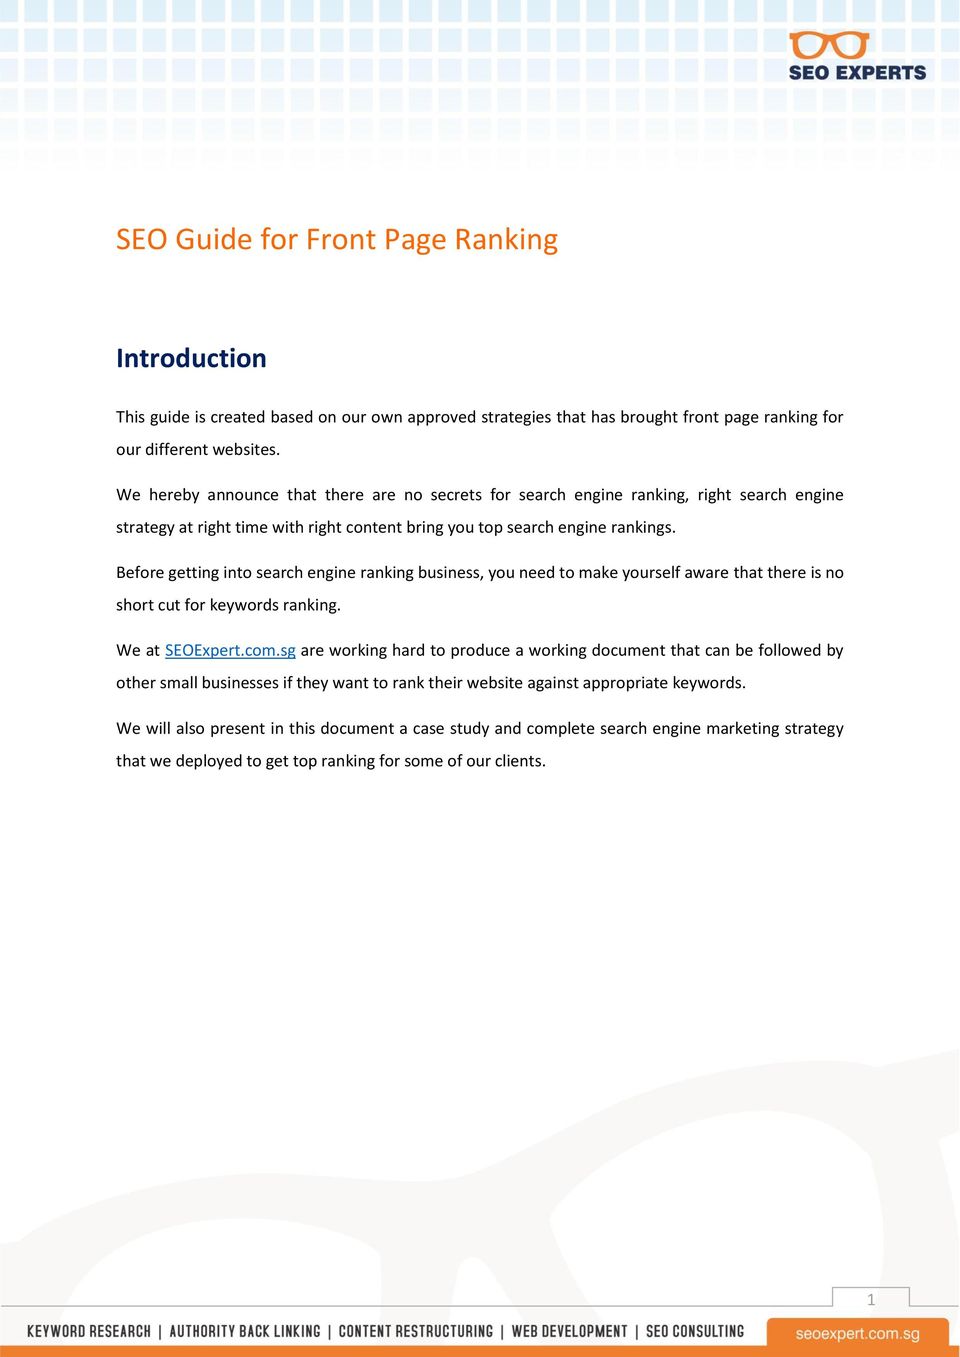 Before getting into search engine ranking business, you need to make yourself aware that there is no short cut for keywords ranking. We at SEOExpert.com.